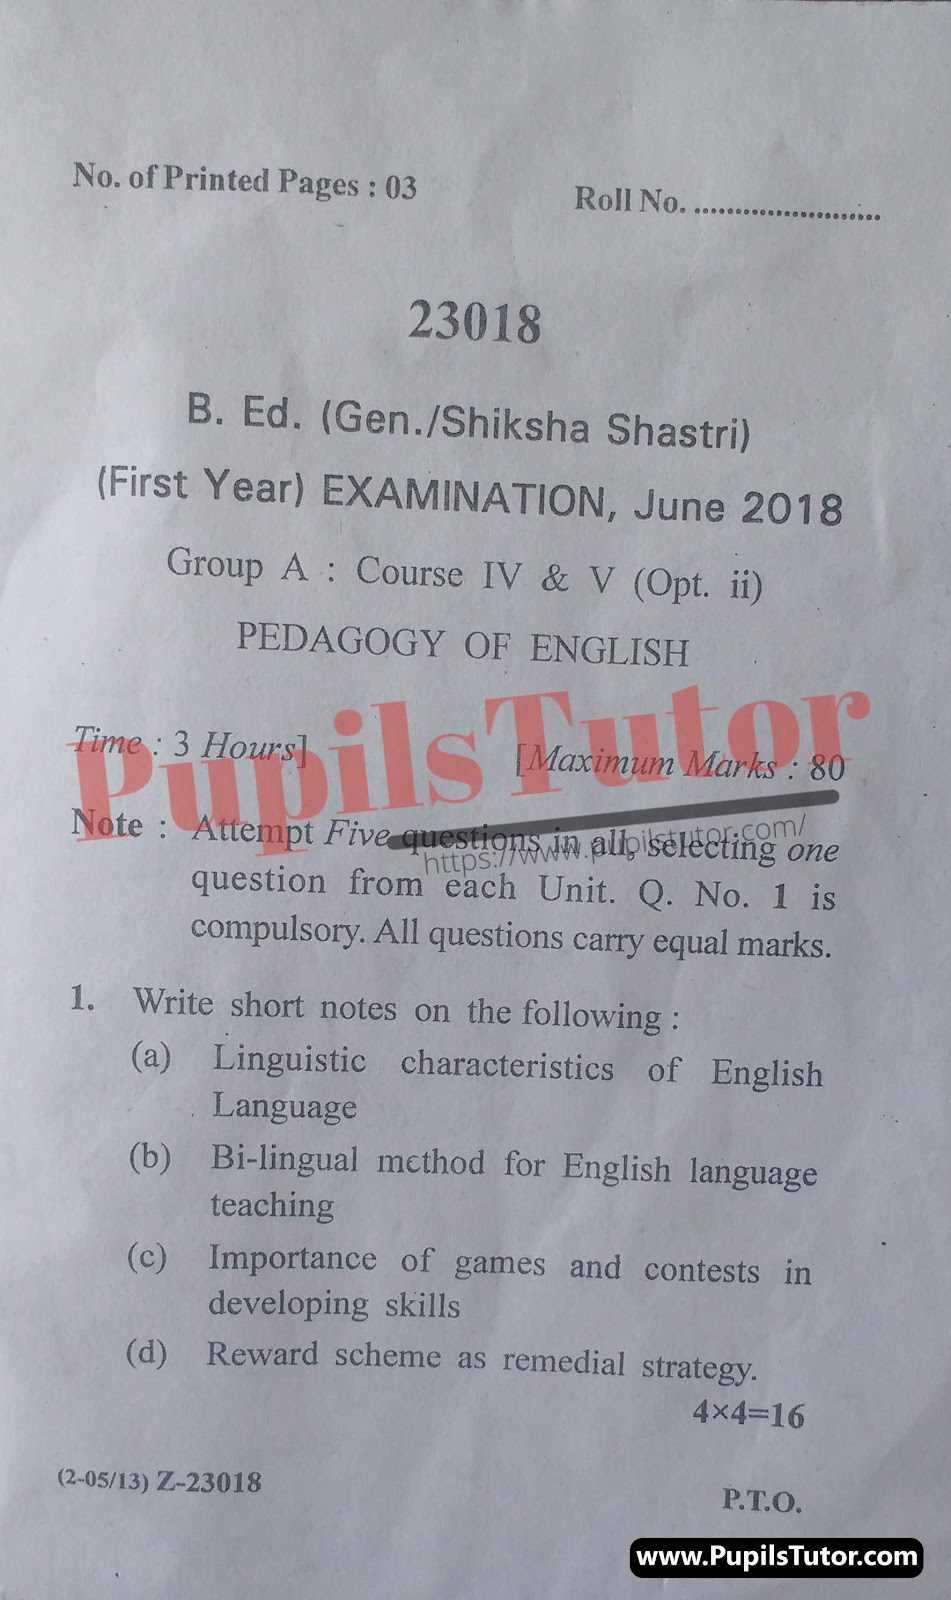 CRSU (Chaudhary Ranbir Singh University, Jind Haryana) BEd Regular Exam First Year Previous Year Pedagogy Of English Question Paper For June, 2018 Exam (Question Paper Page 1) - pupilstutor.com